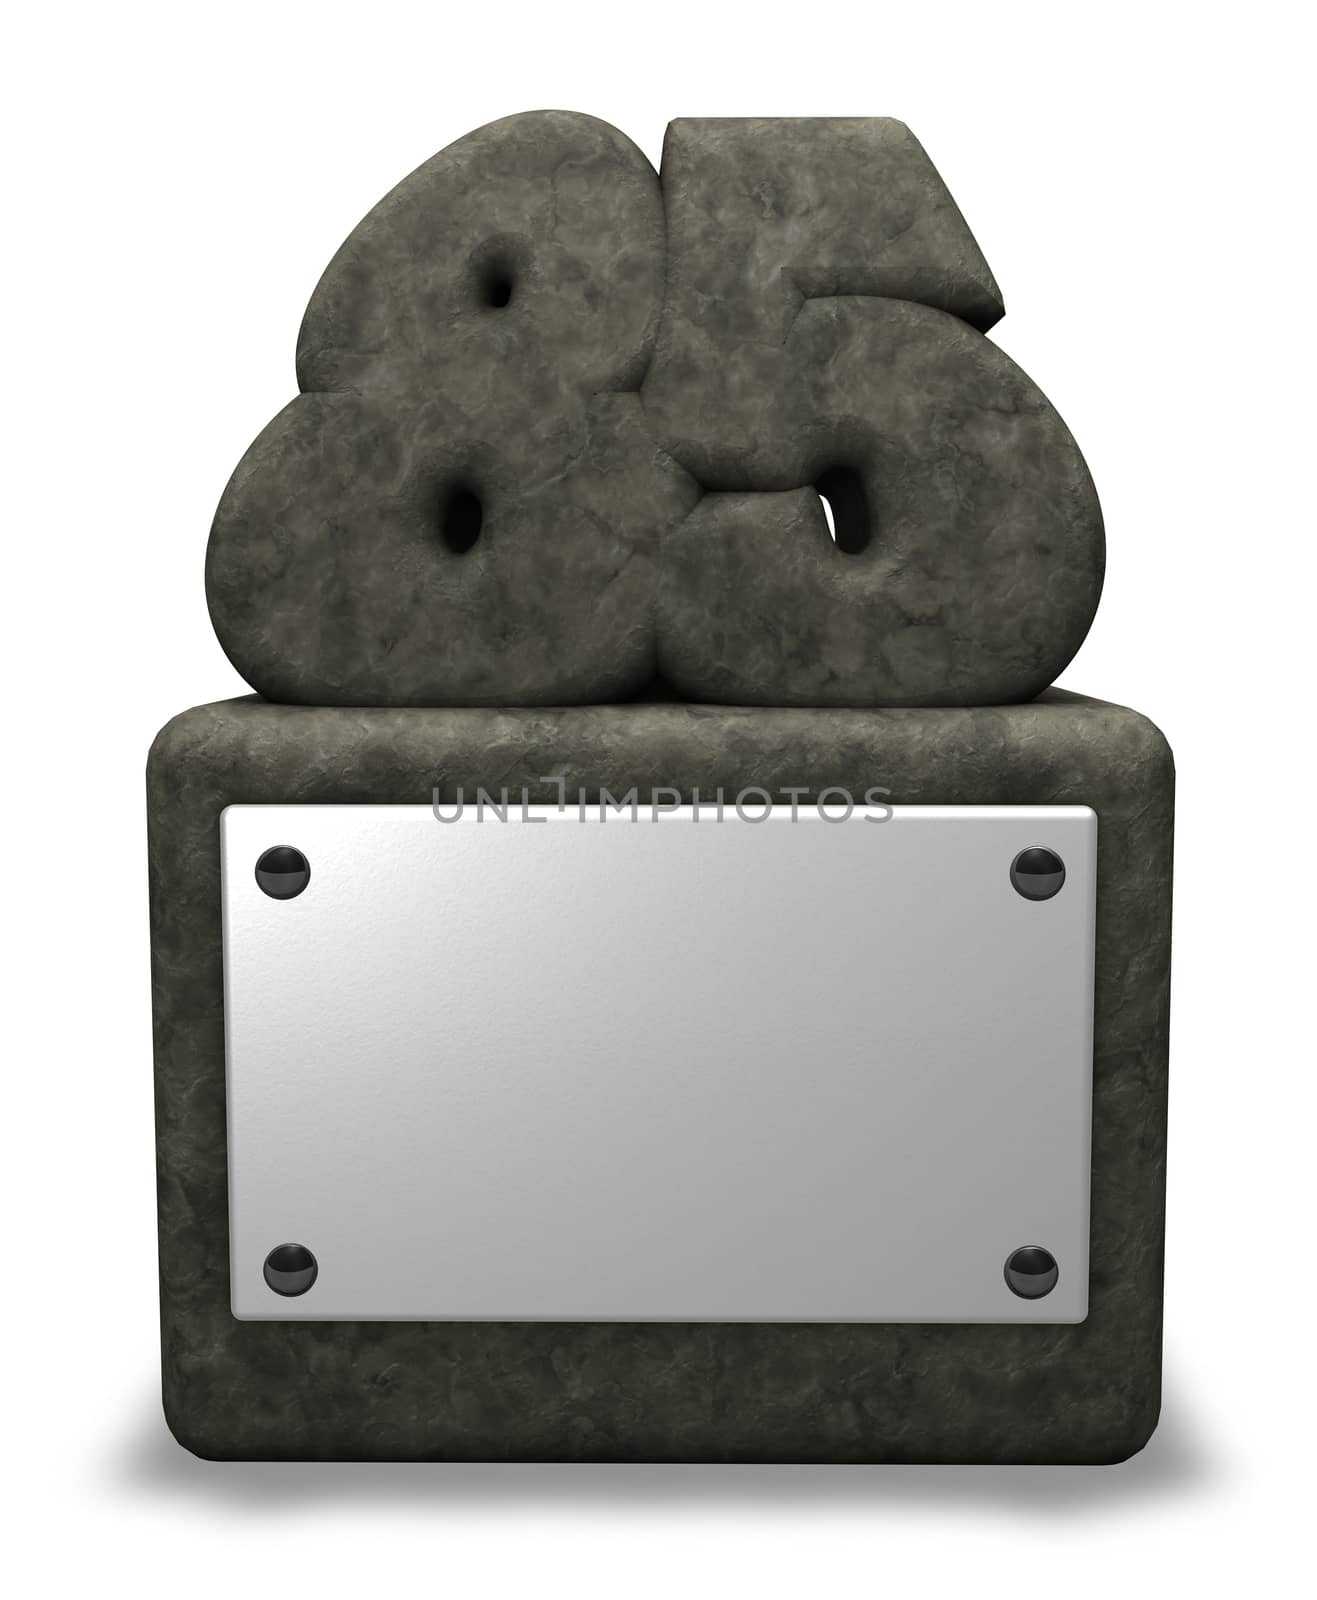 stone number eighty five on socket - 3d illustration